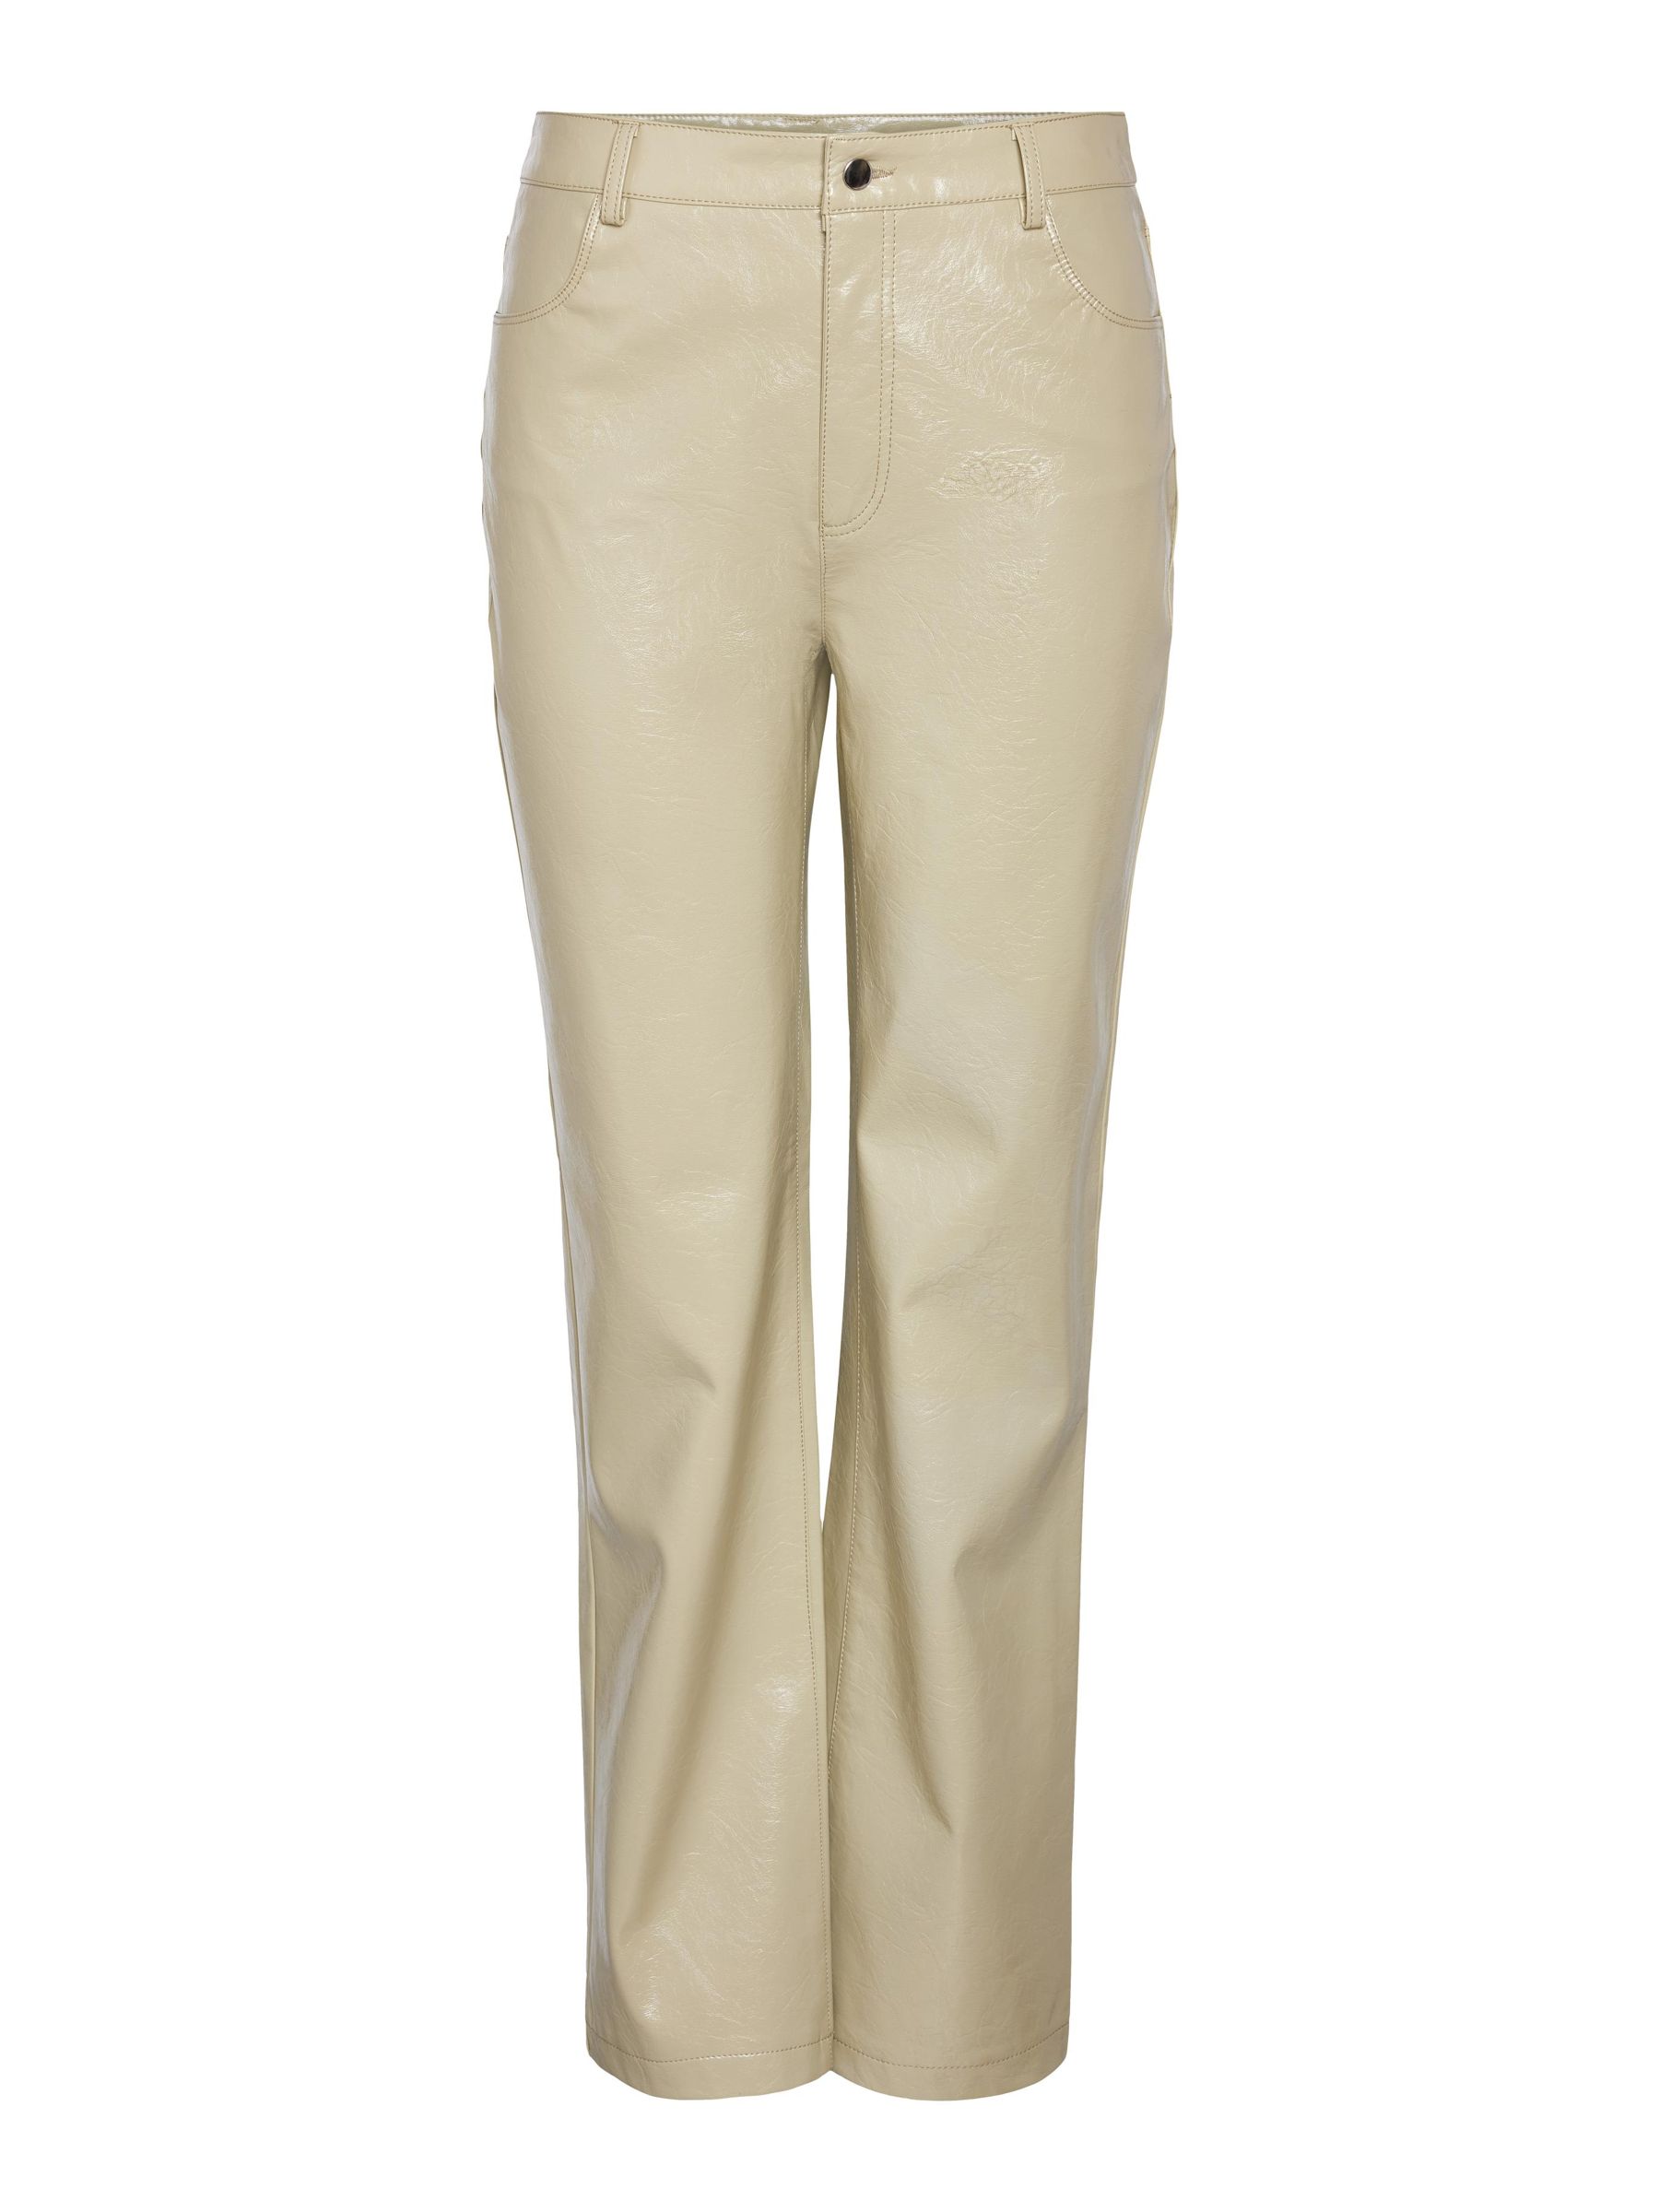 FAUX LEATHER TROUSERS | Beige | NOISY MAY®